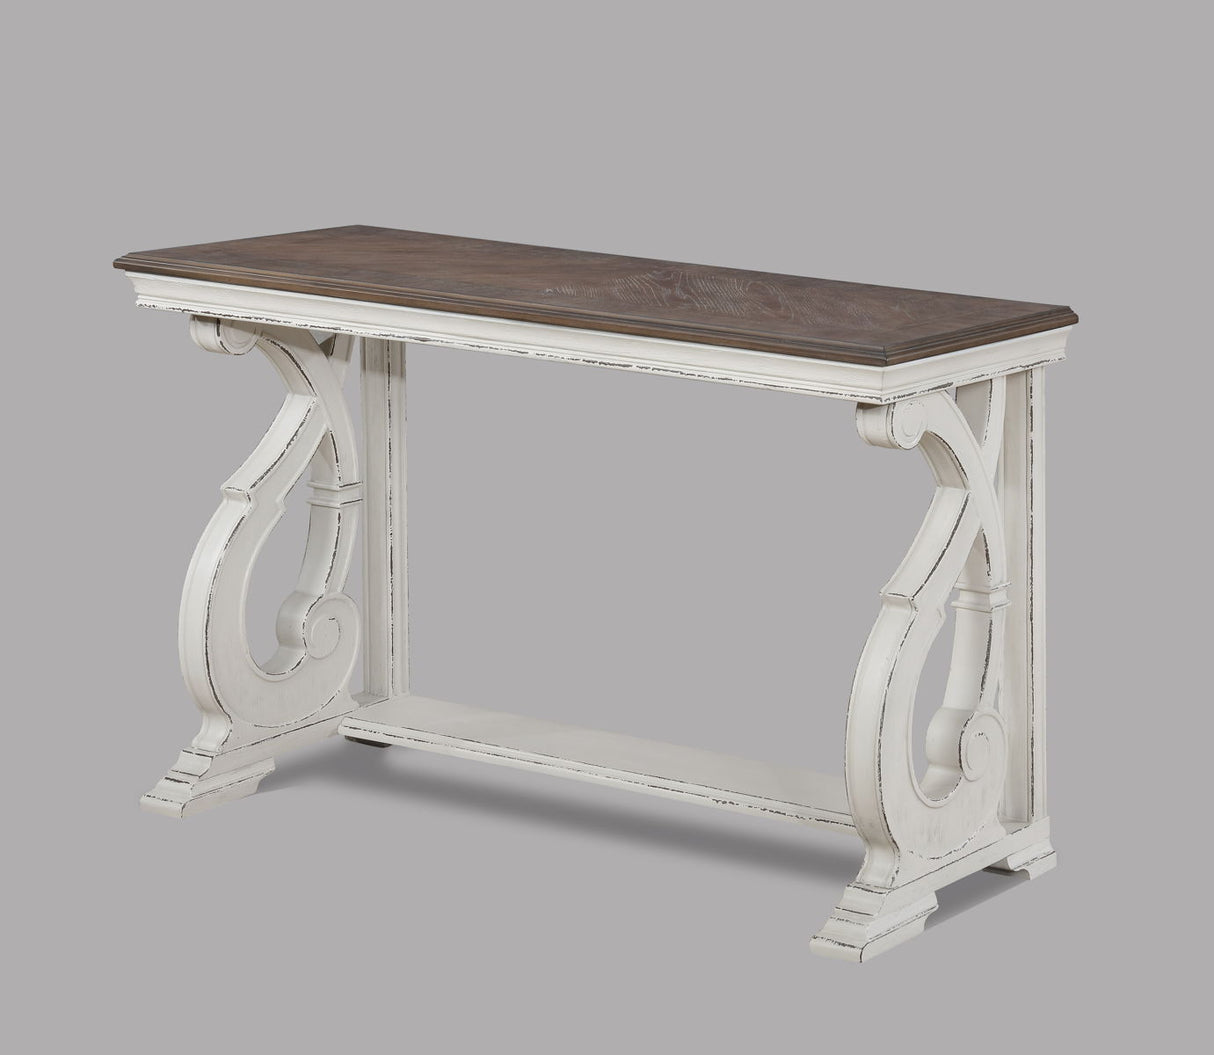 Clementine - Sofa Table